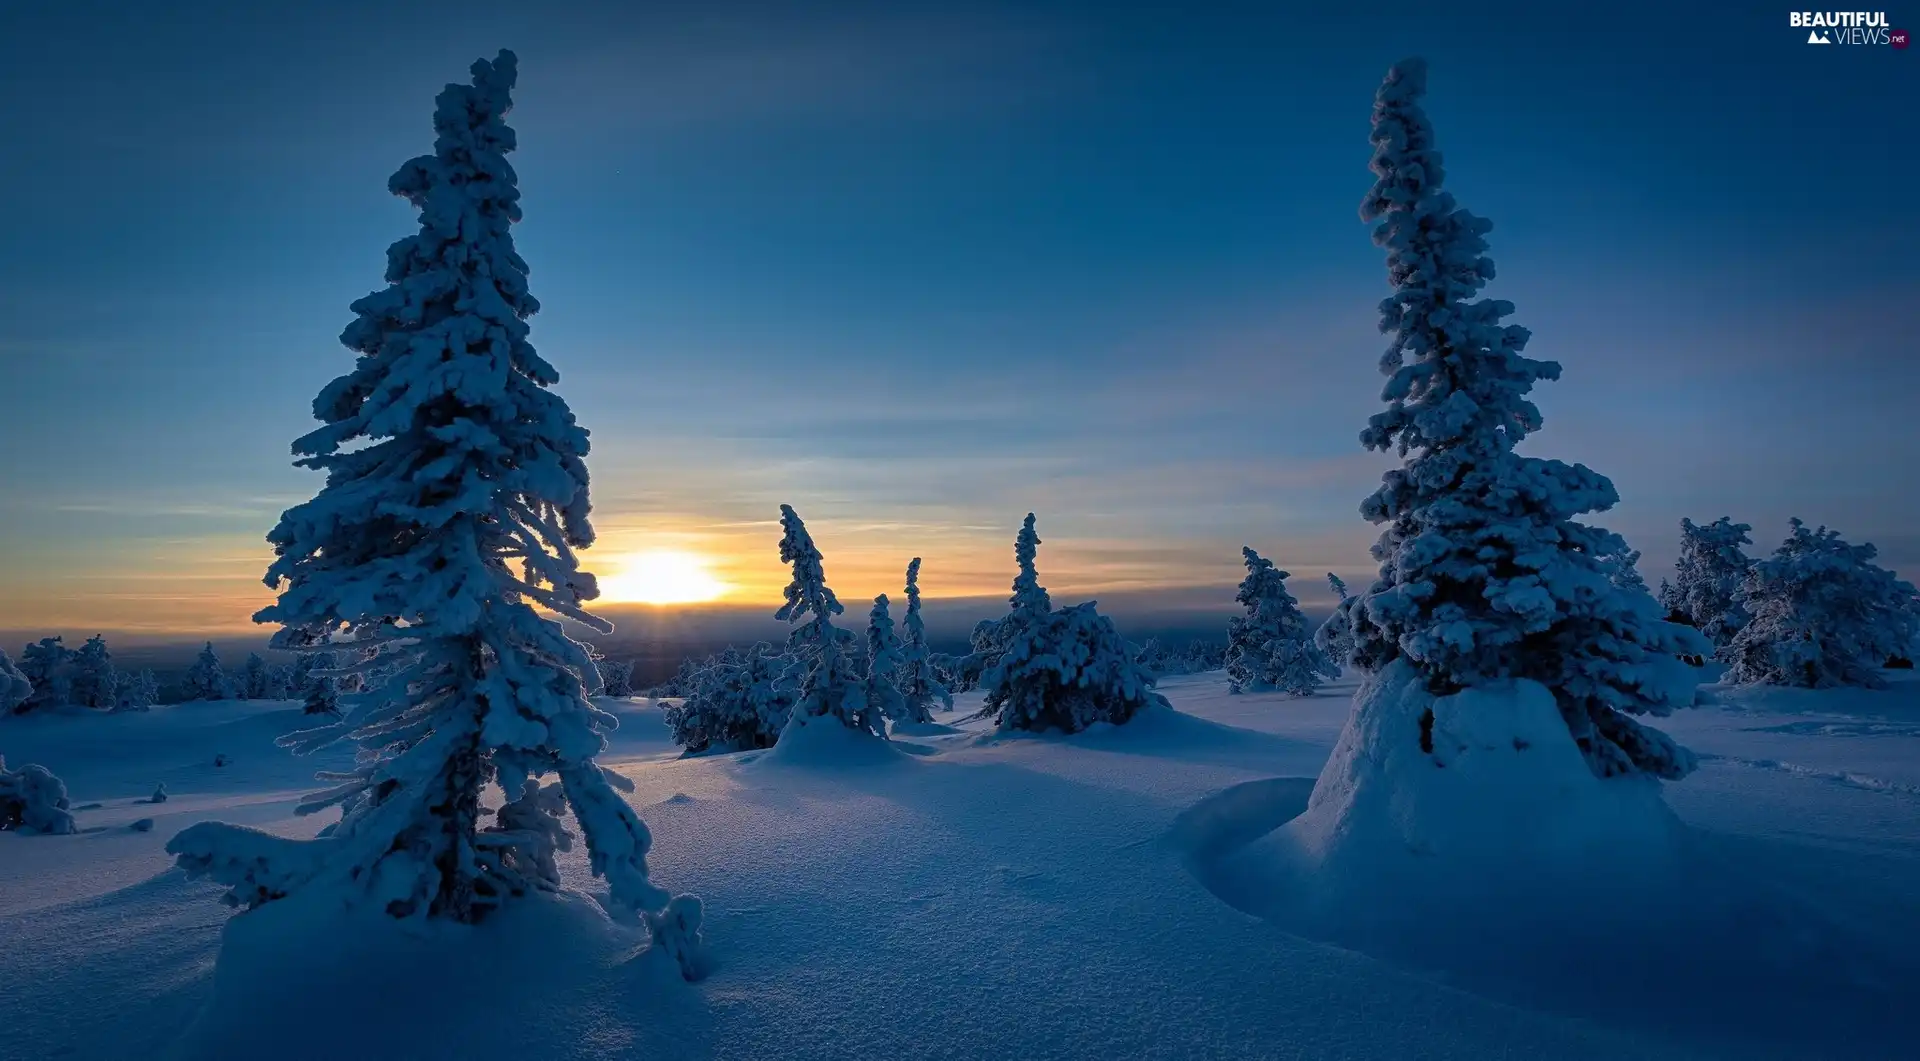 Snowy, Lapland Region, Riisitunturi National Park, viewes, winter, Finland, Municipality of Posio, Spruces, trees, Great Sunsets